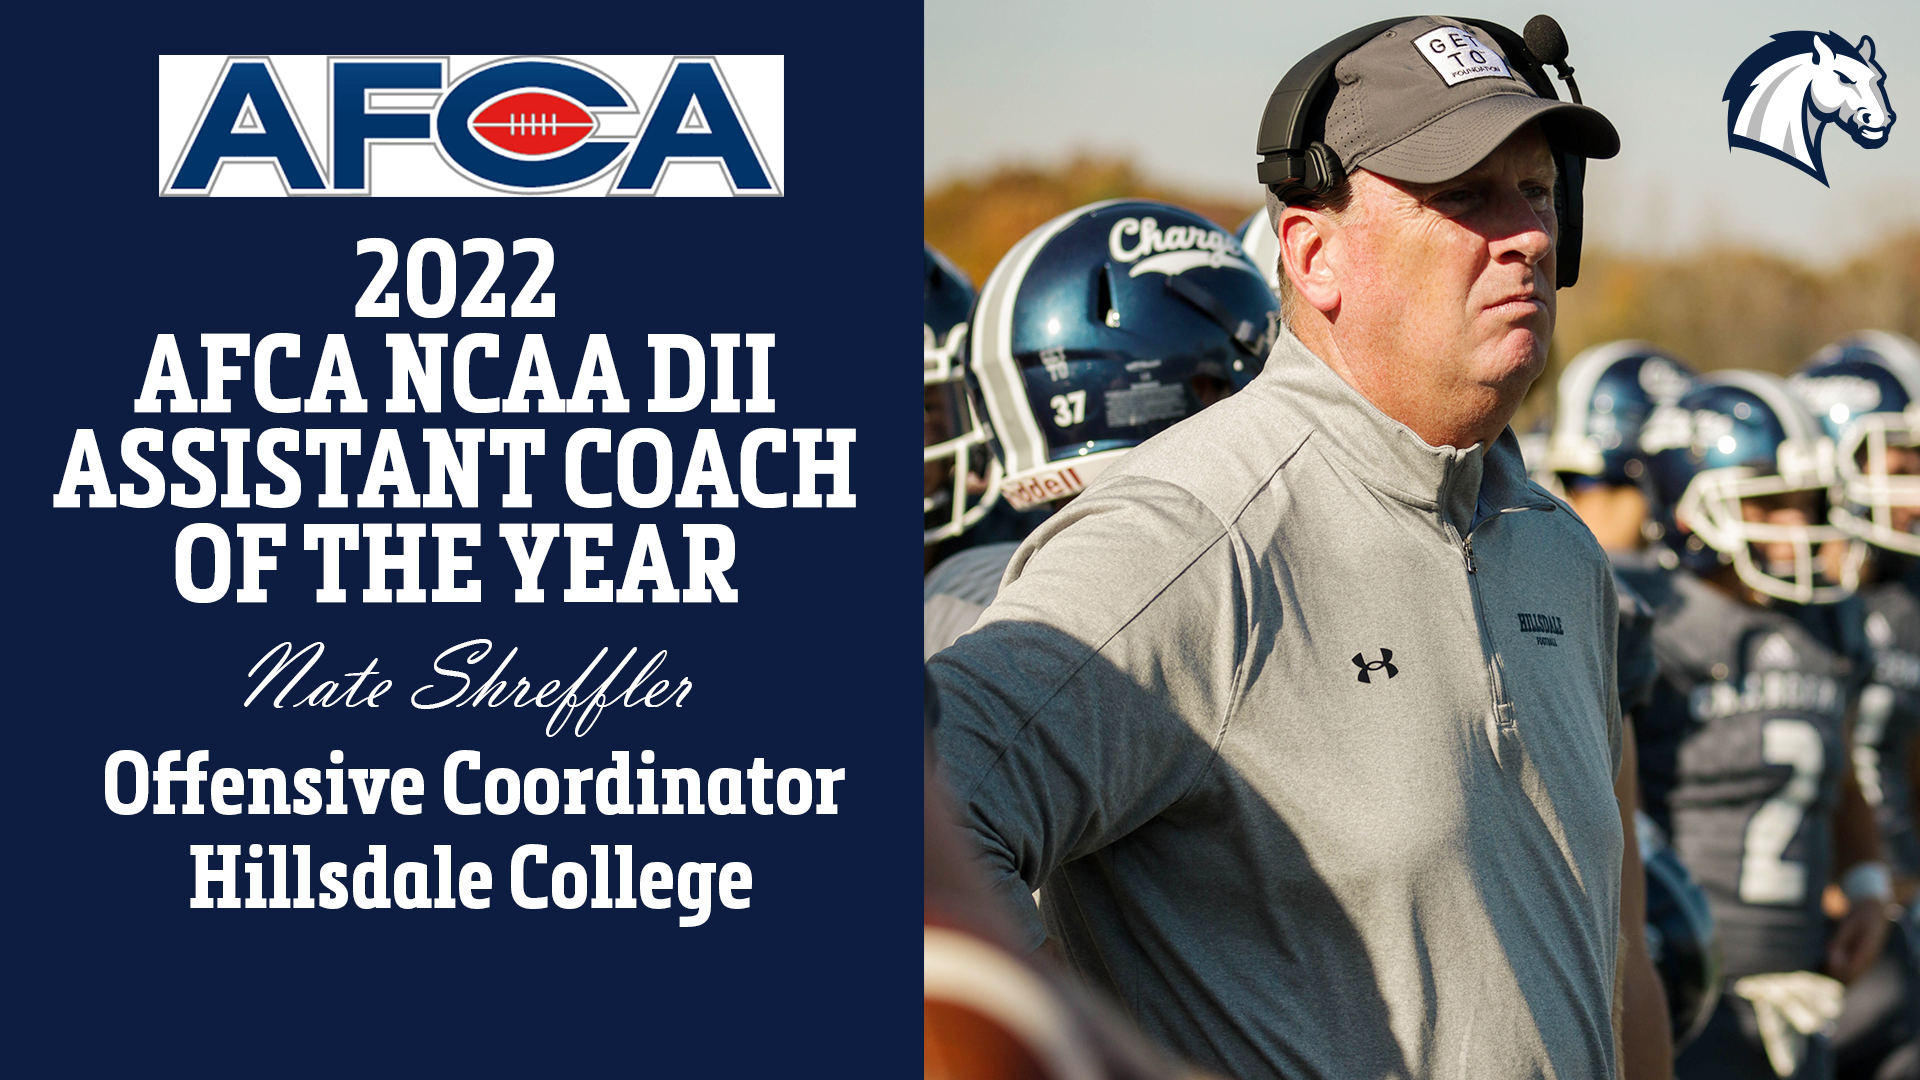 Chargers Offensive Coordinator Nate Shreffler named 2022 AFCA NCAA DII Assistant Coach of the Year